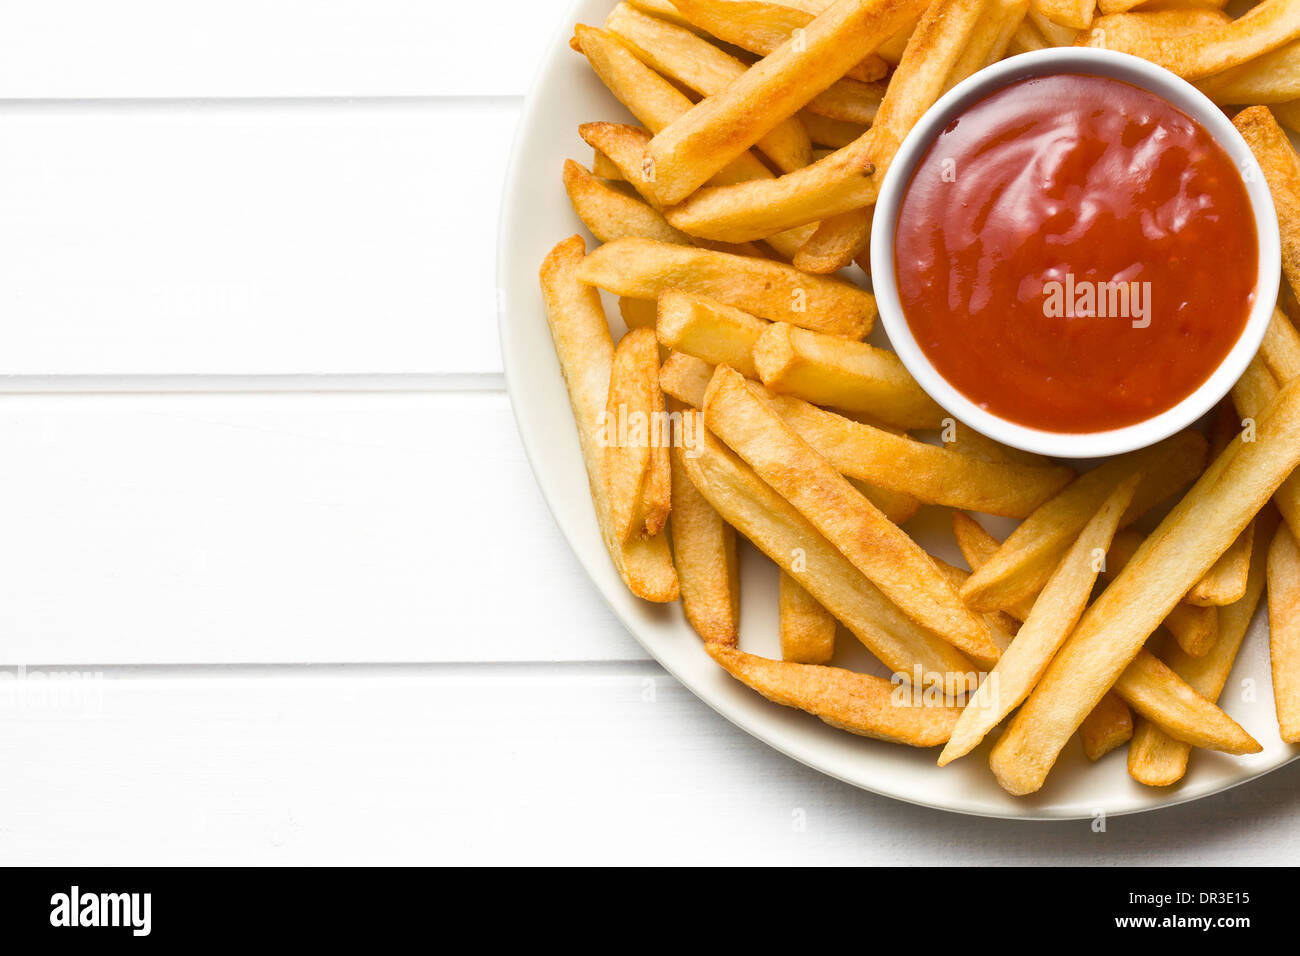 top view of french fries with ketchup on plate Stock Photo